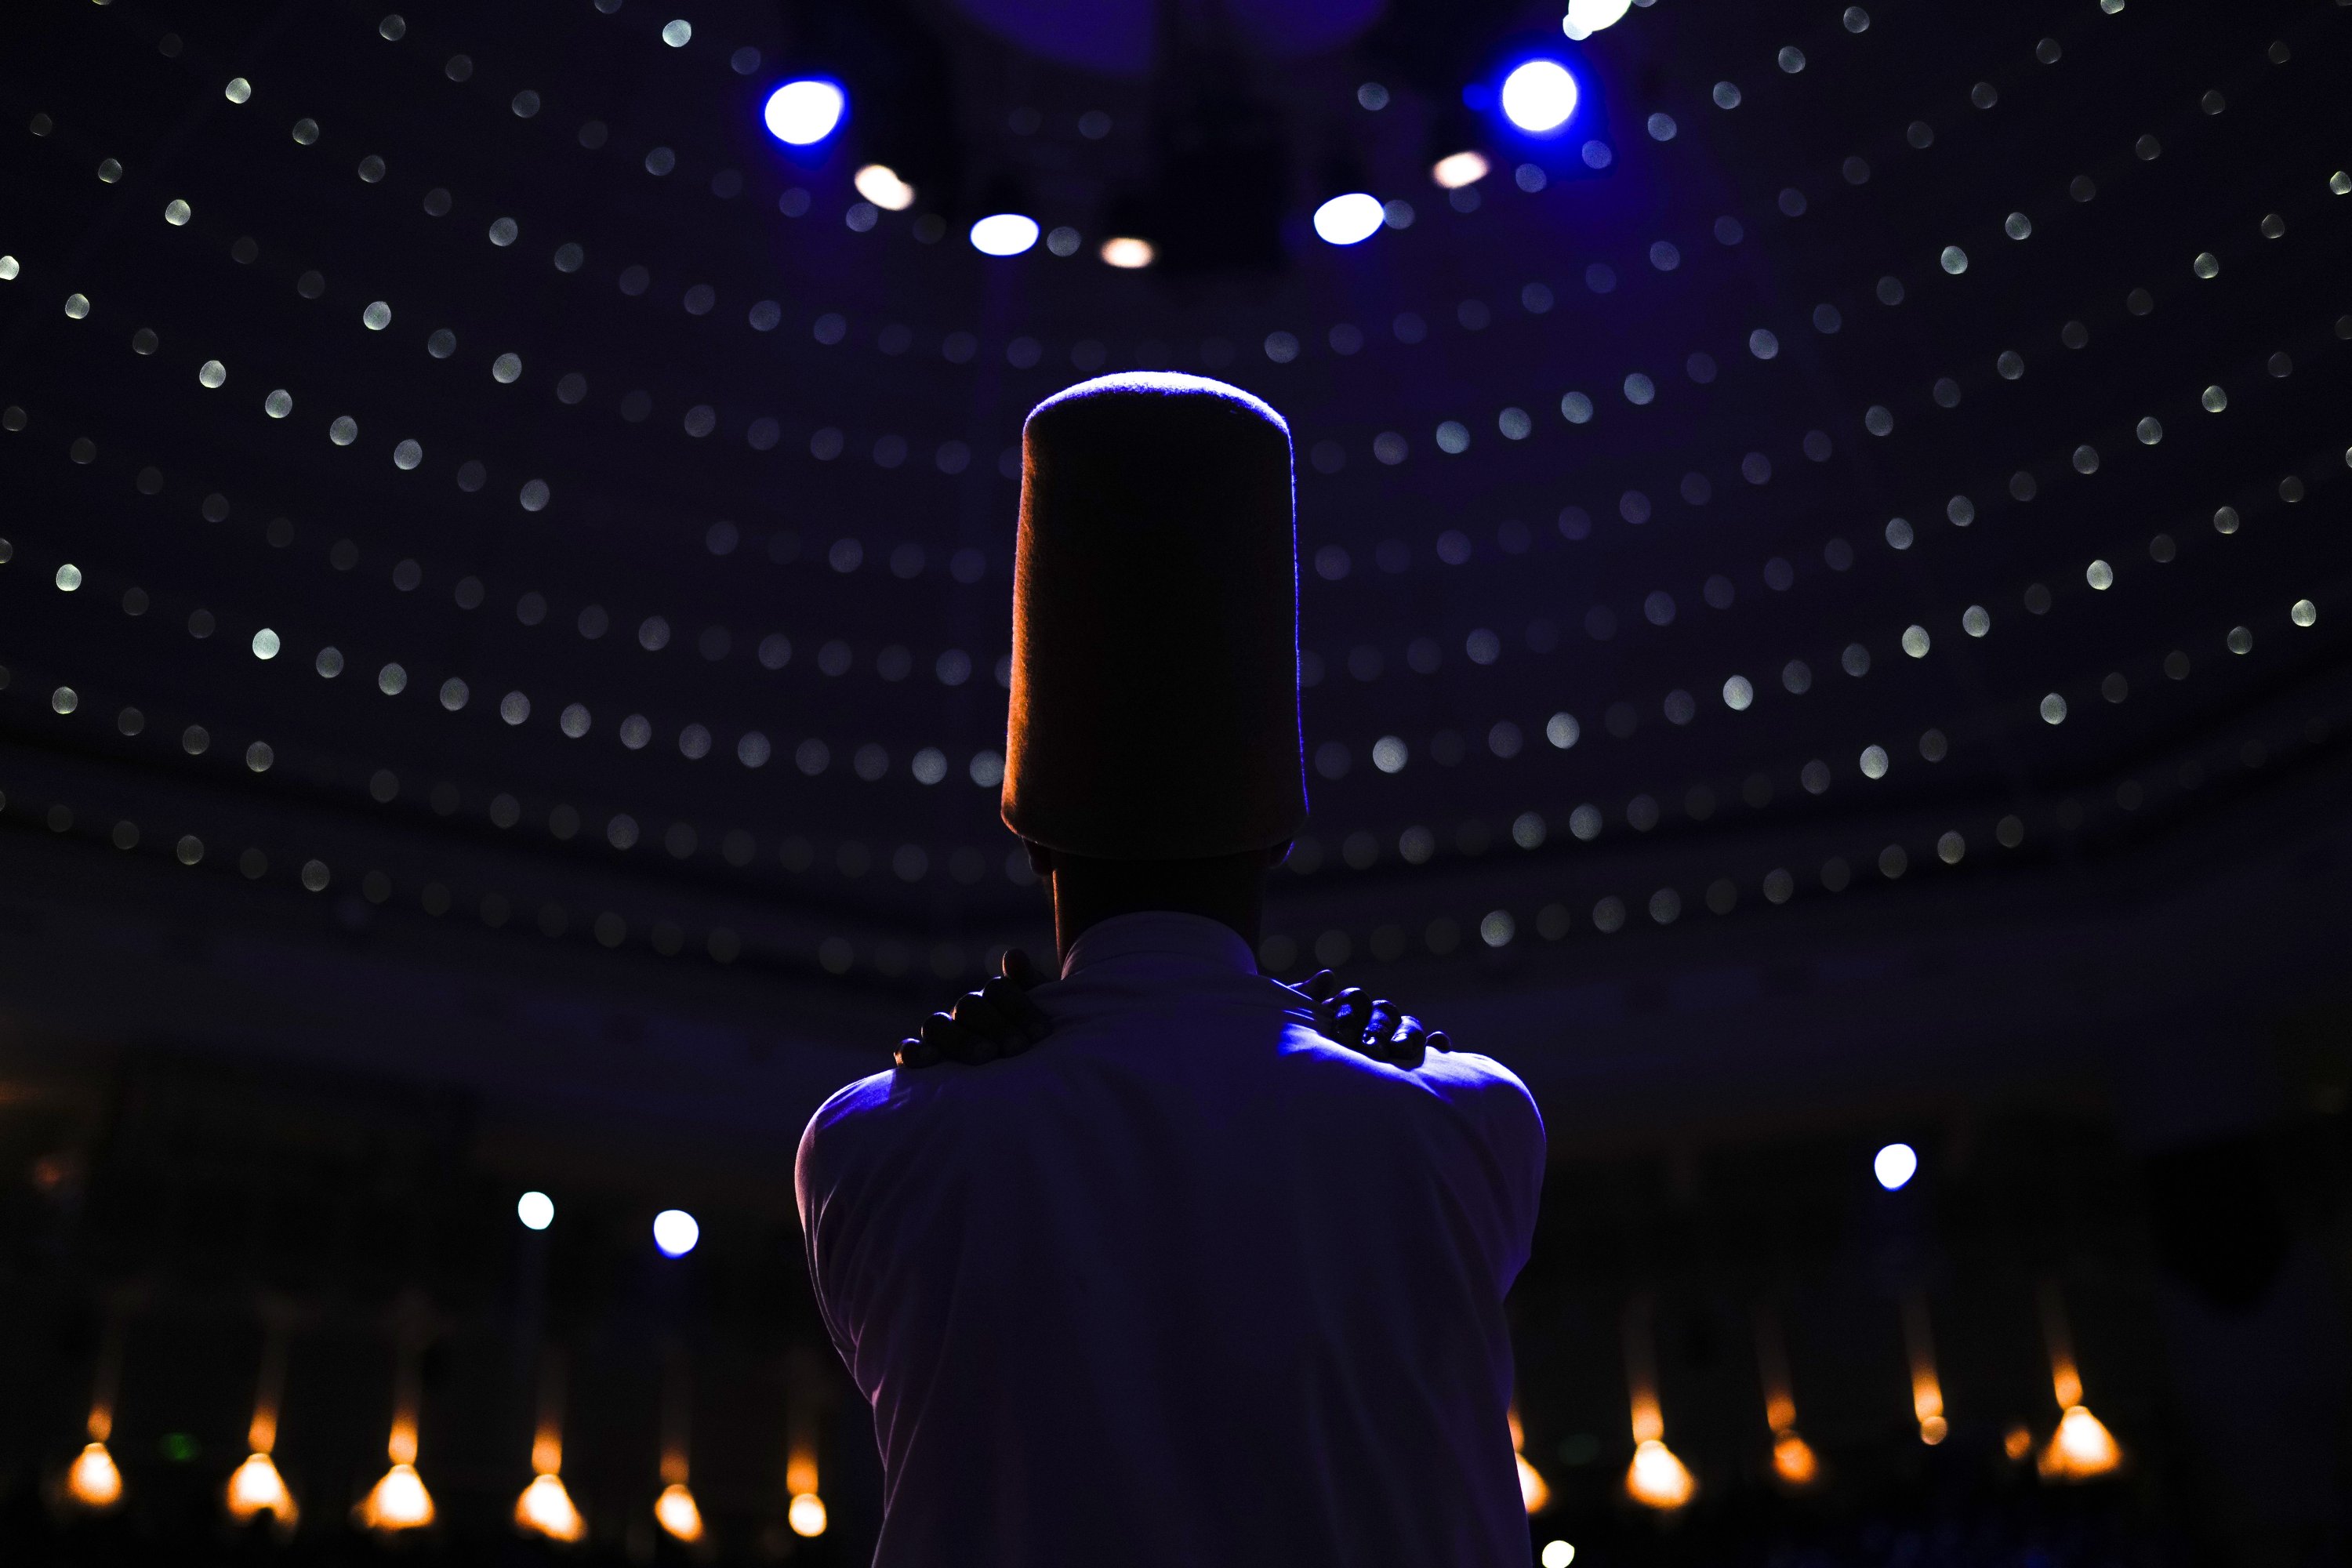 A whirling dervish of the Mevlevi Order performs during a Sheb-i Arus ceremony in Konya, central Turkey, Dec. 17, 2021. (AP Photo)